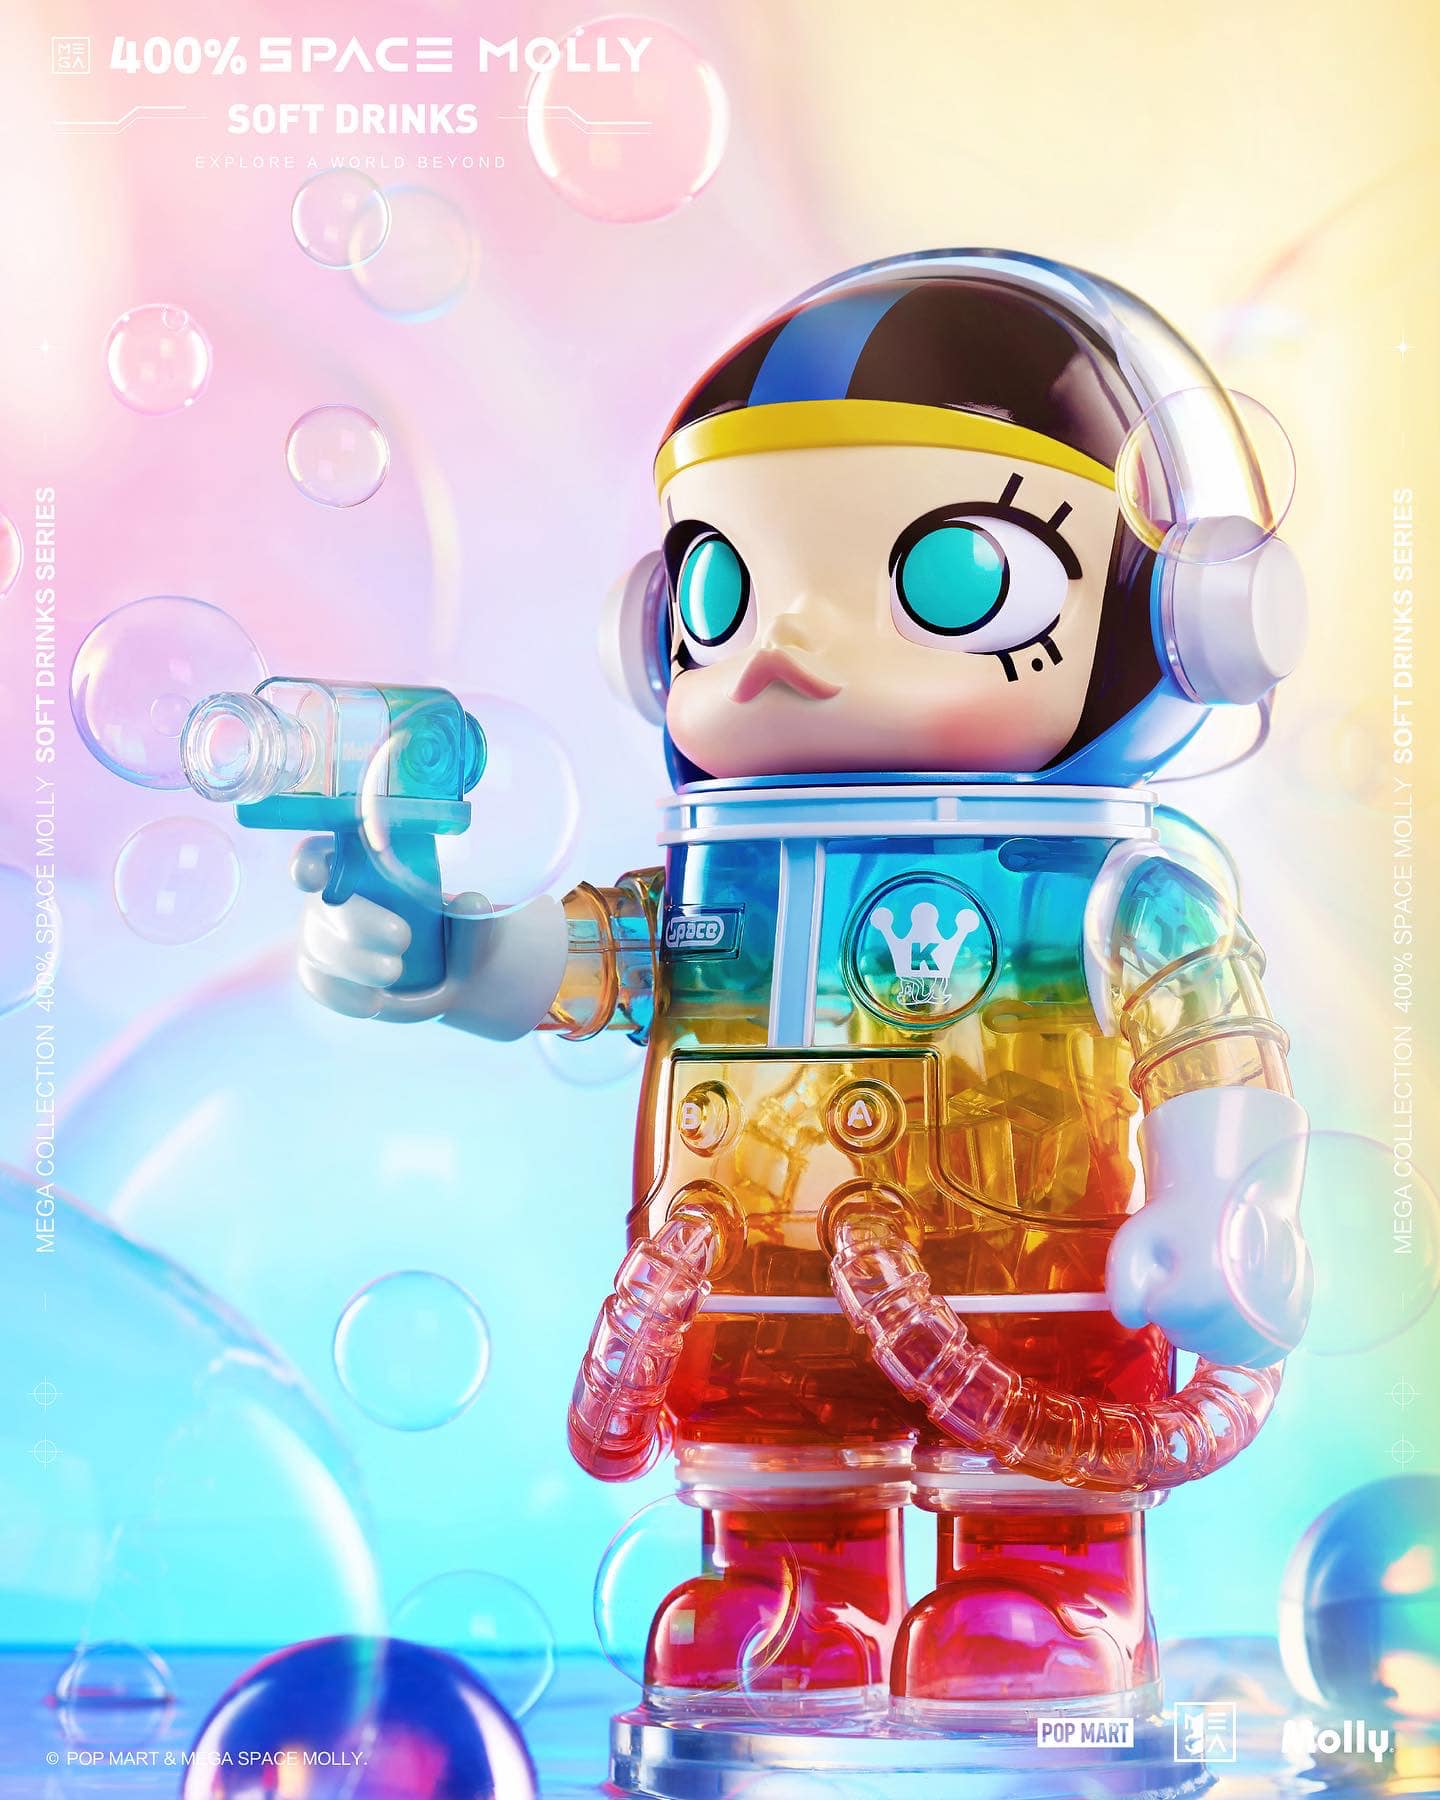 Toy in a bubble with blue and black stripes, colorful body, and logo close-up from 400% Space Molly Soft Drinks series.